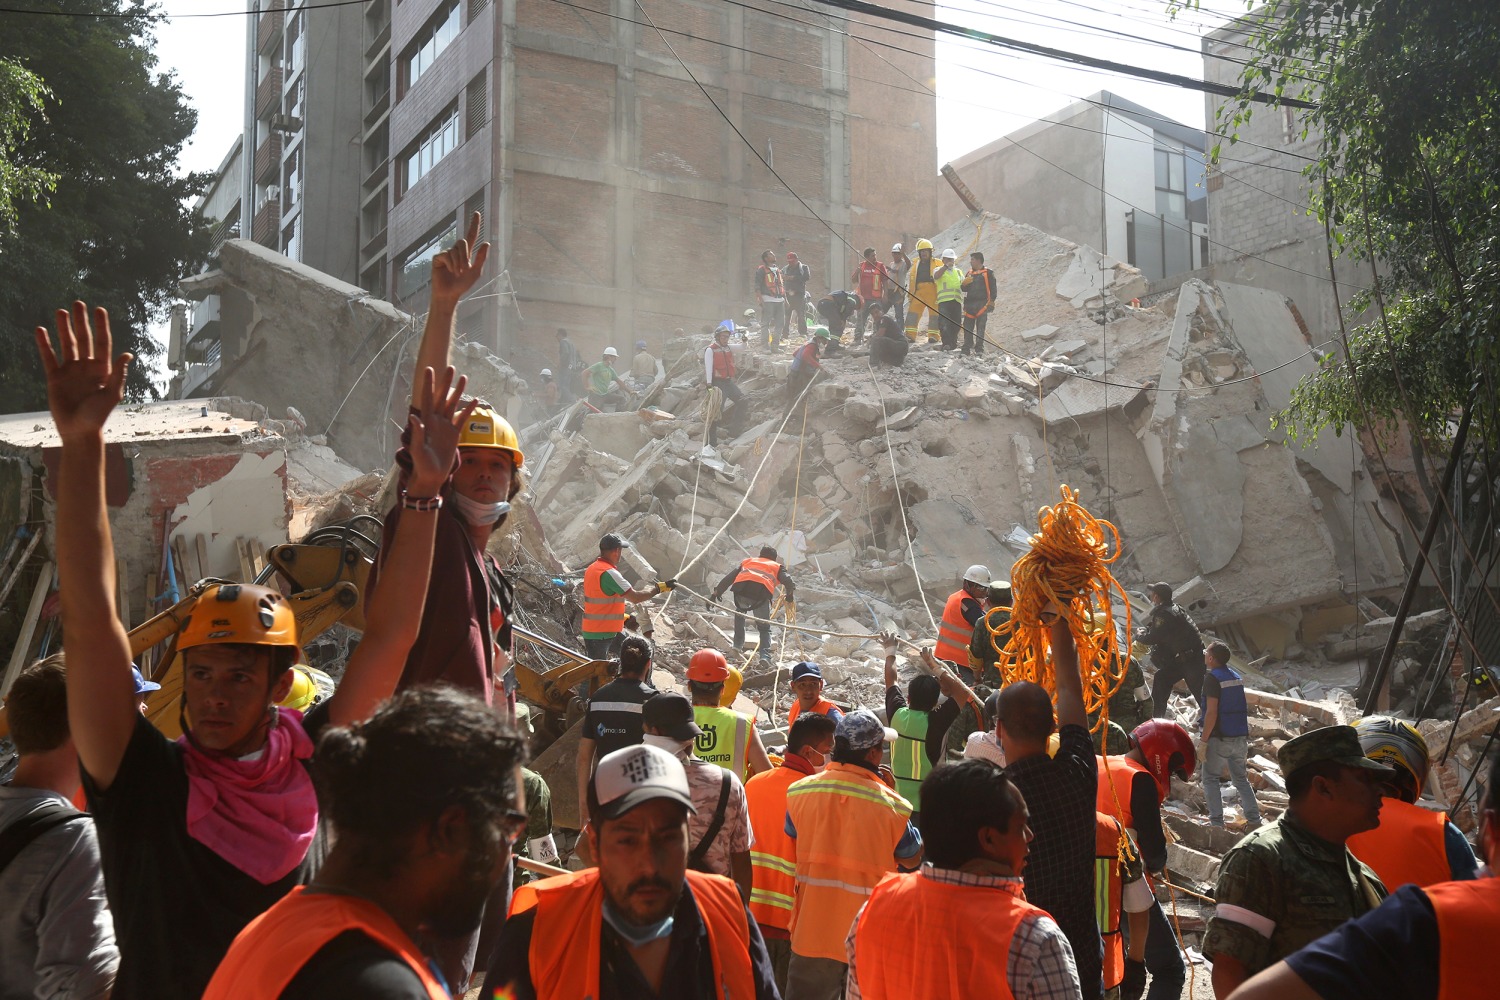 No casualties after Mexico City commercial center collapse